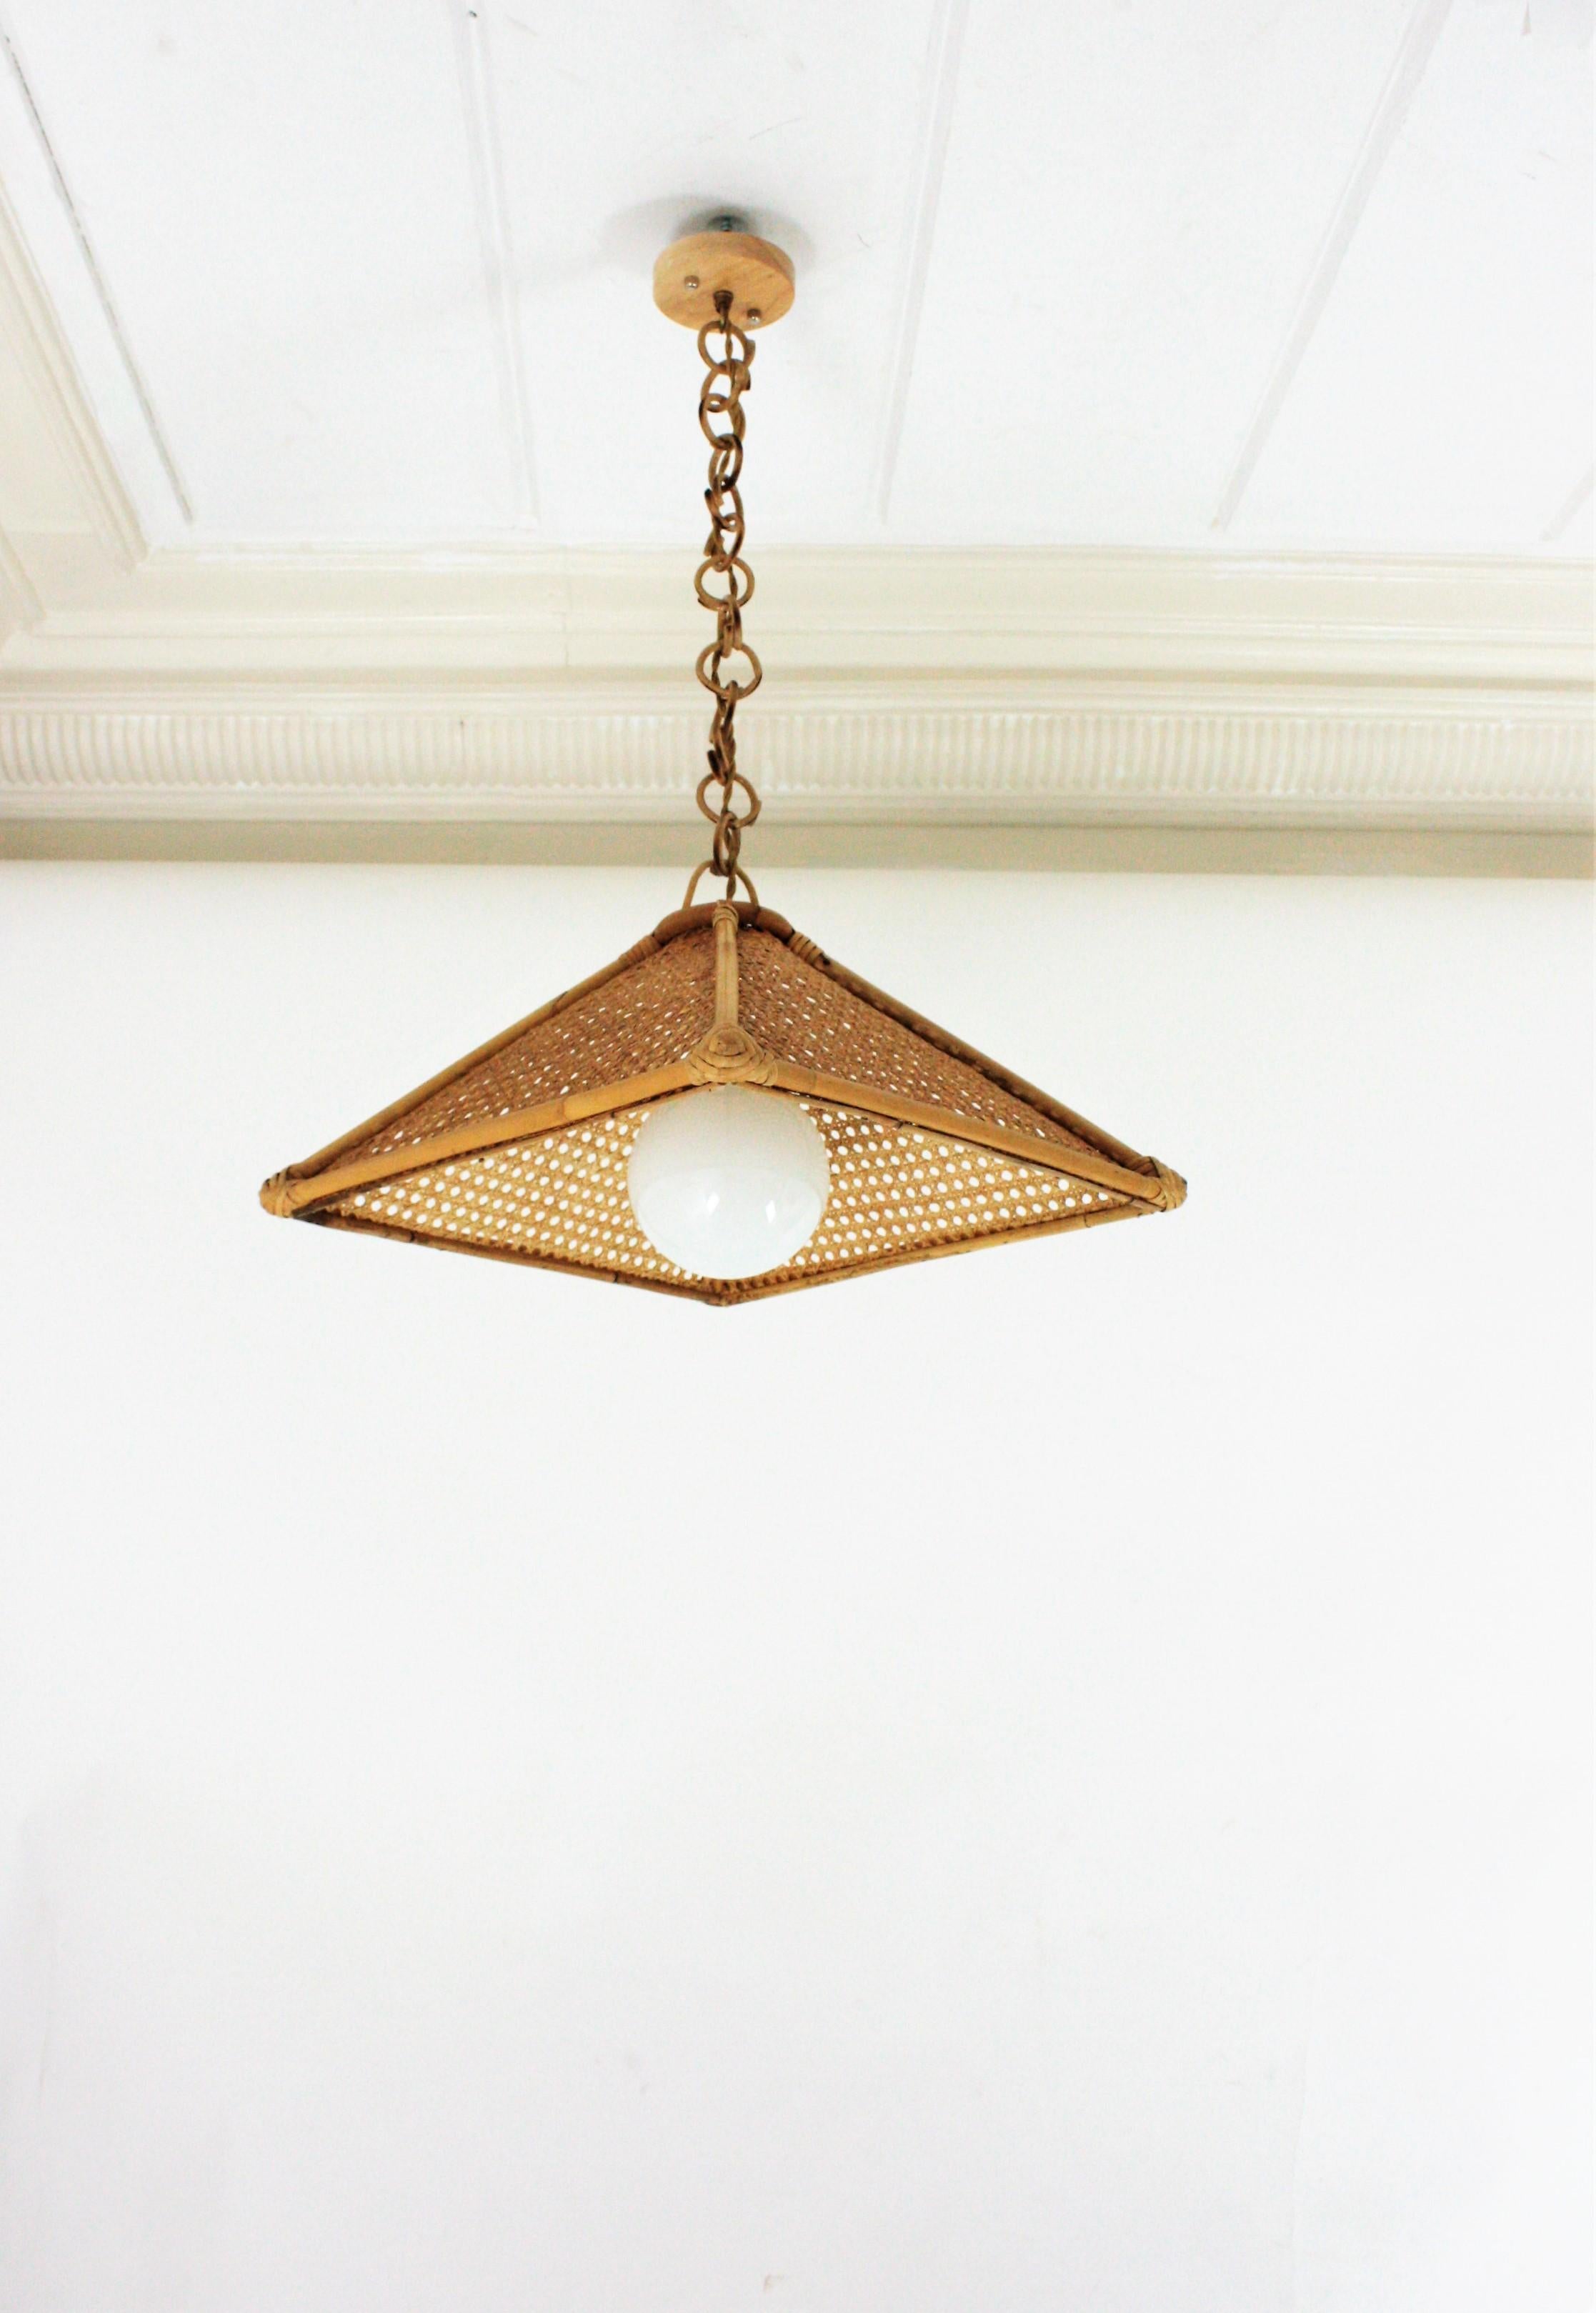 Spanish Modern Rattan and Wicker Wire Trapezoid Pendant Hanging Light, 1960s For Sale 4